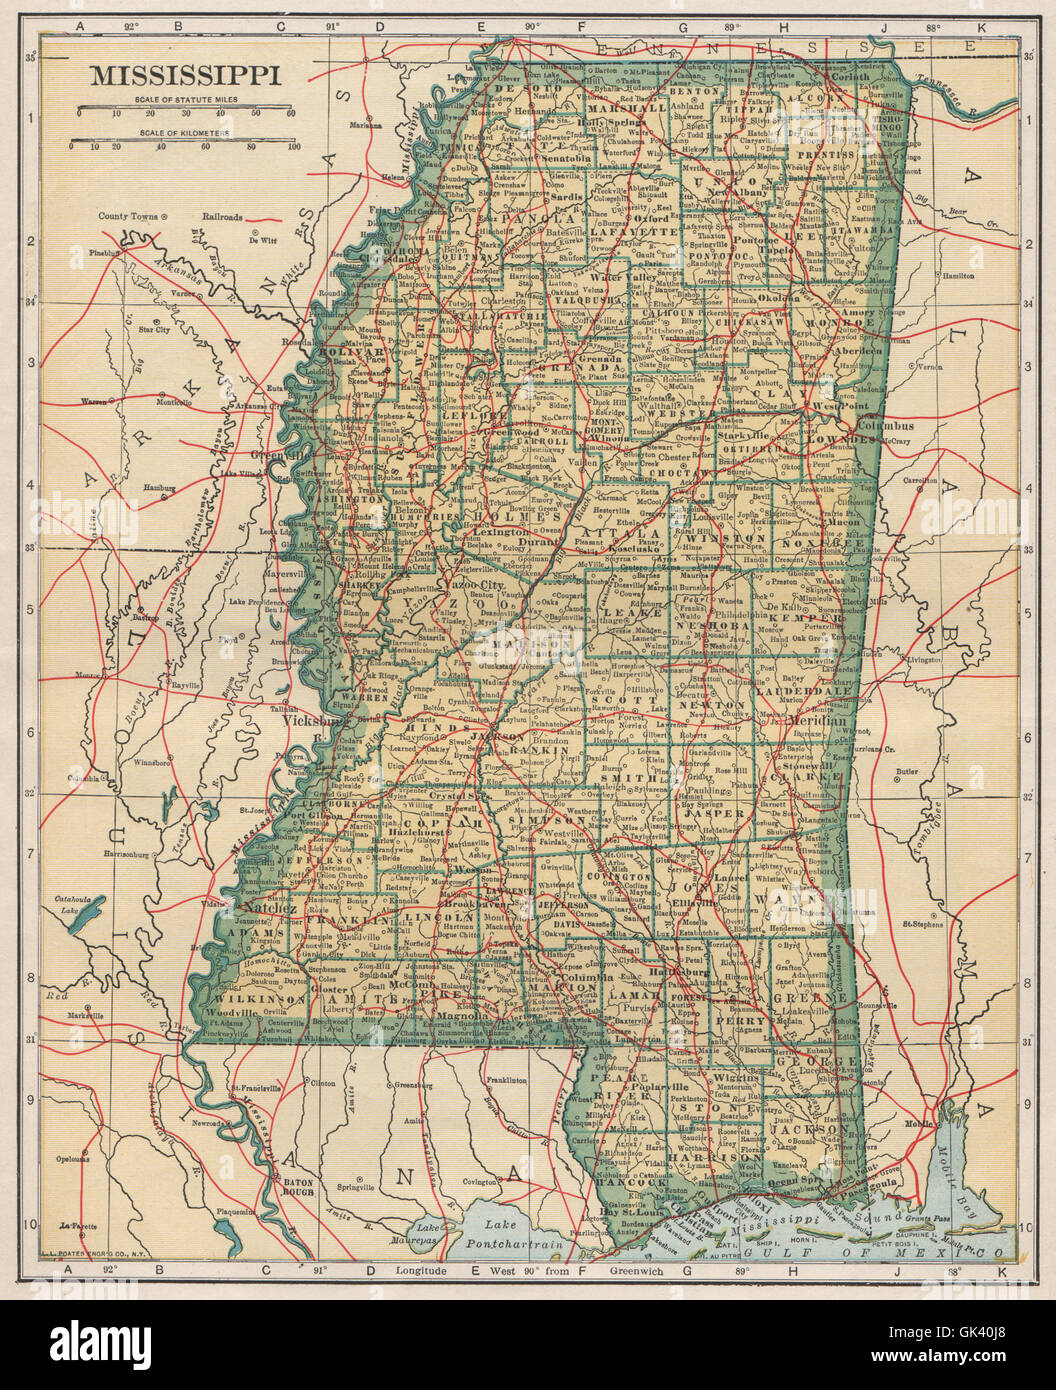 Mississippi state map showing railroads. POATES, 1925 Stock Photo